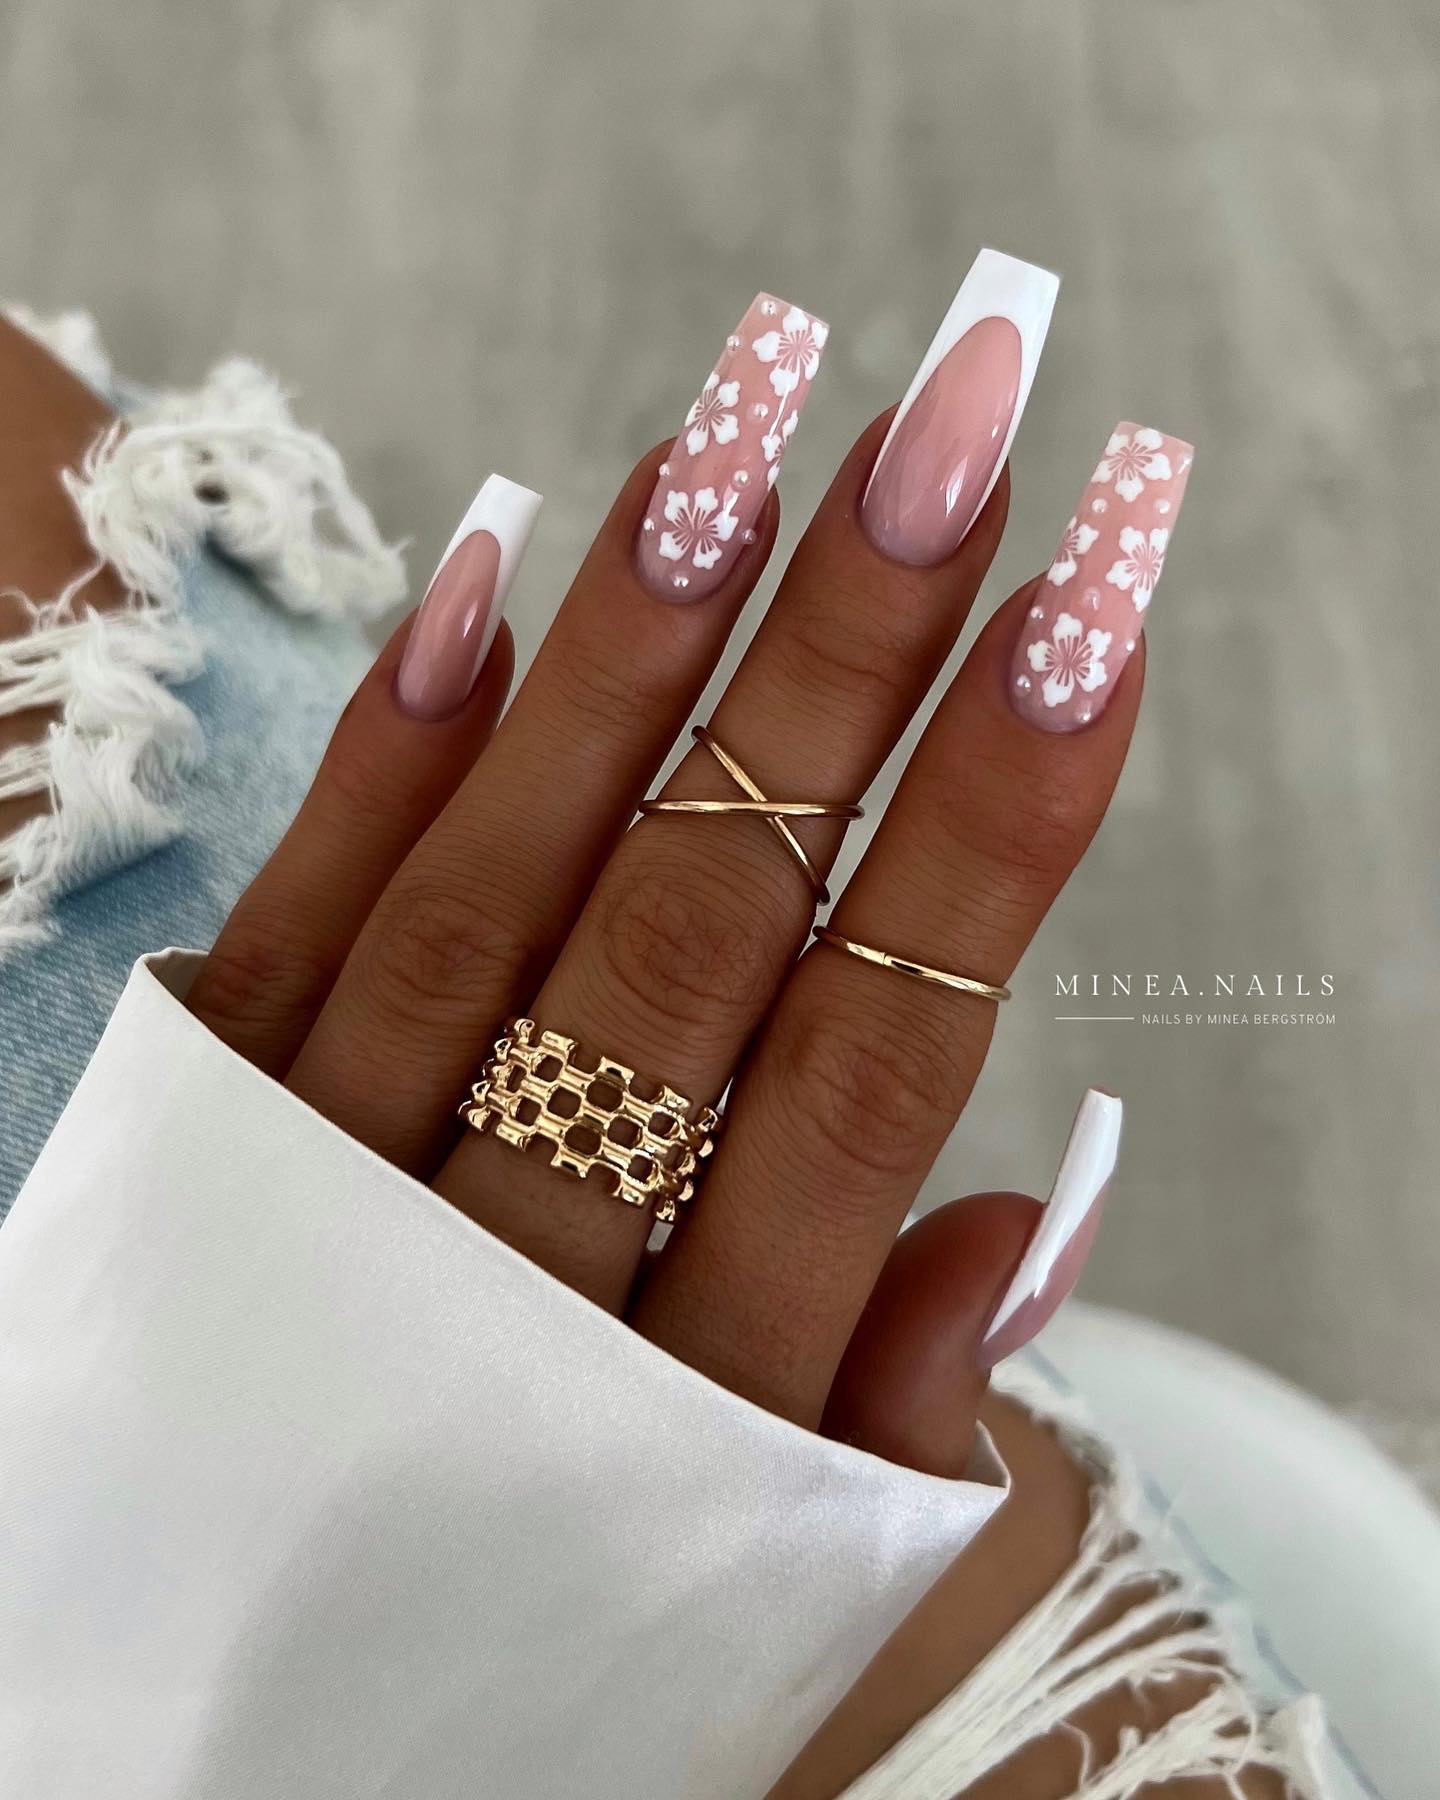 Long Coffin Nails With white french tips and floral lace design